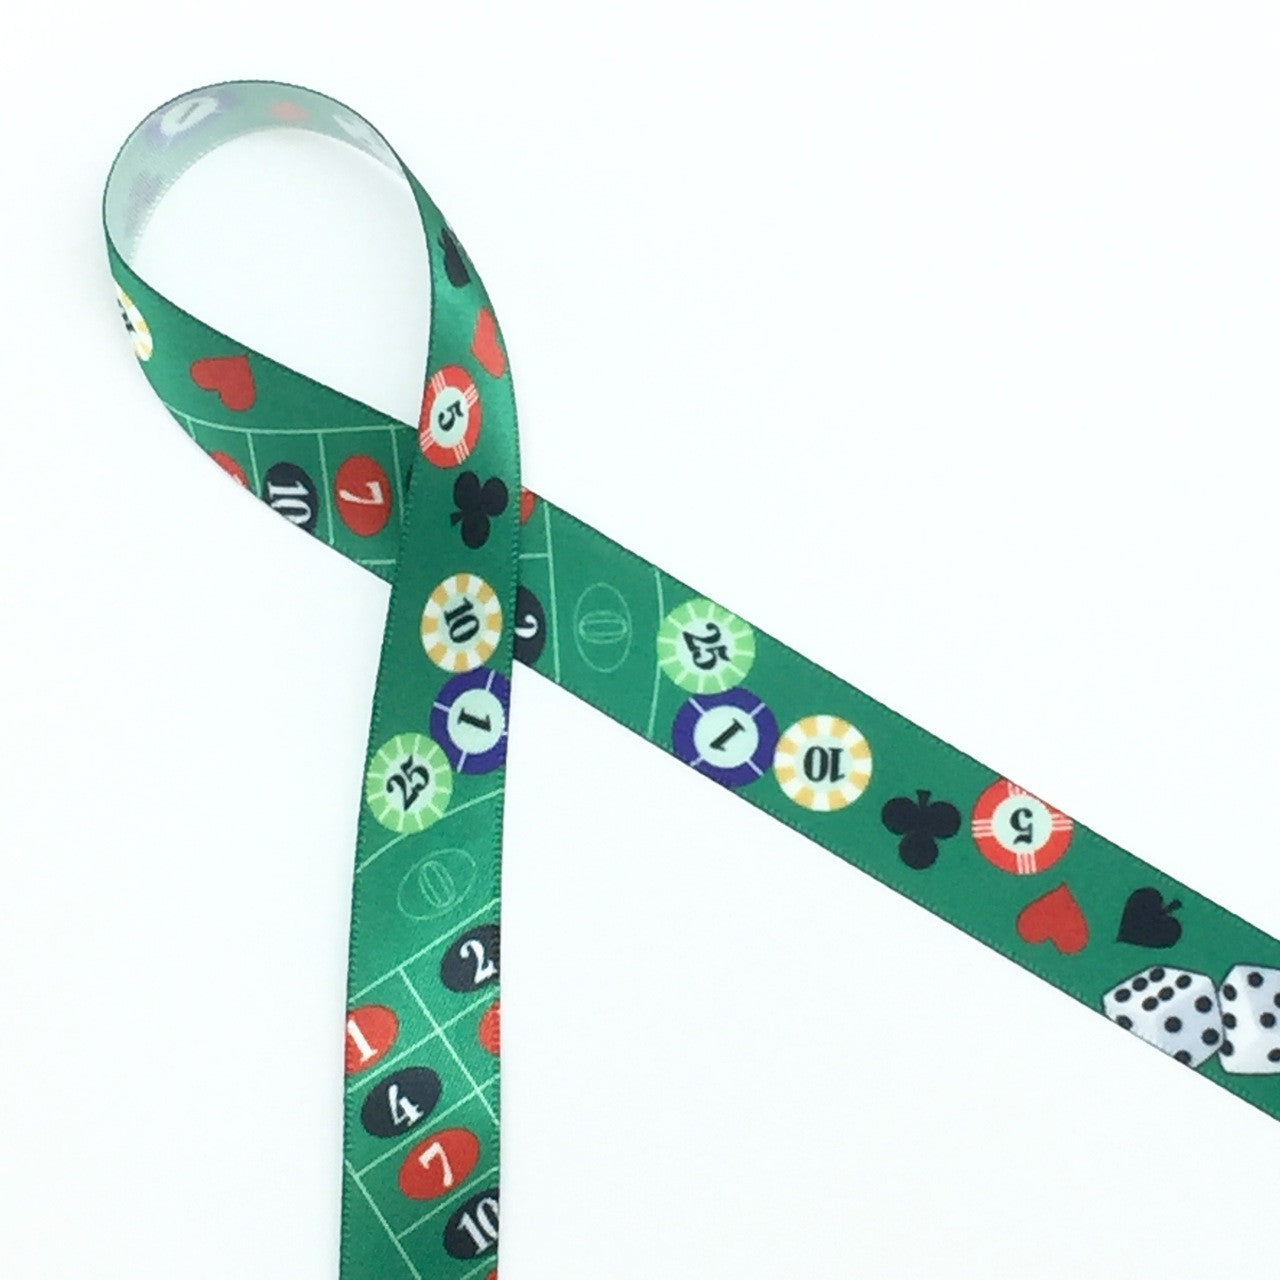 Casino ribbon in 5/8" width featuring tossed spades, diamonds, hearts and clubs along with dice and chips.